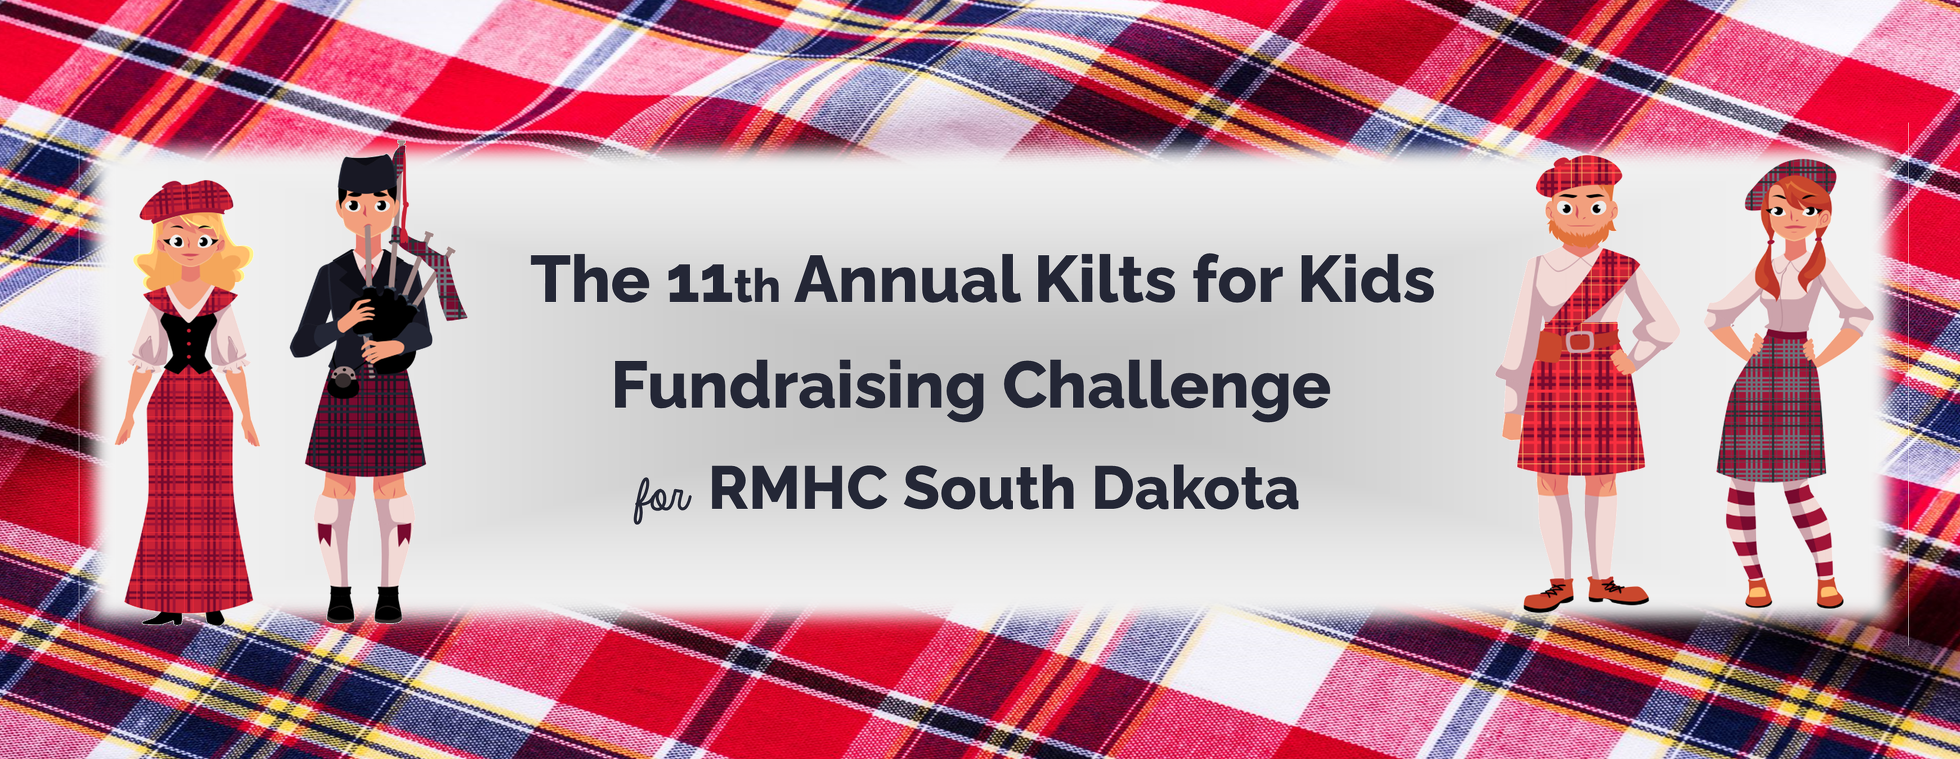 11th Annual Kilts for Kids